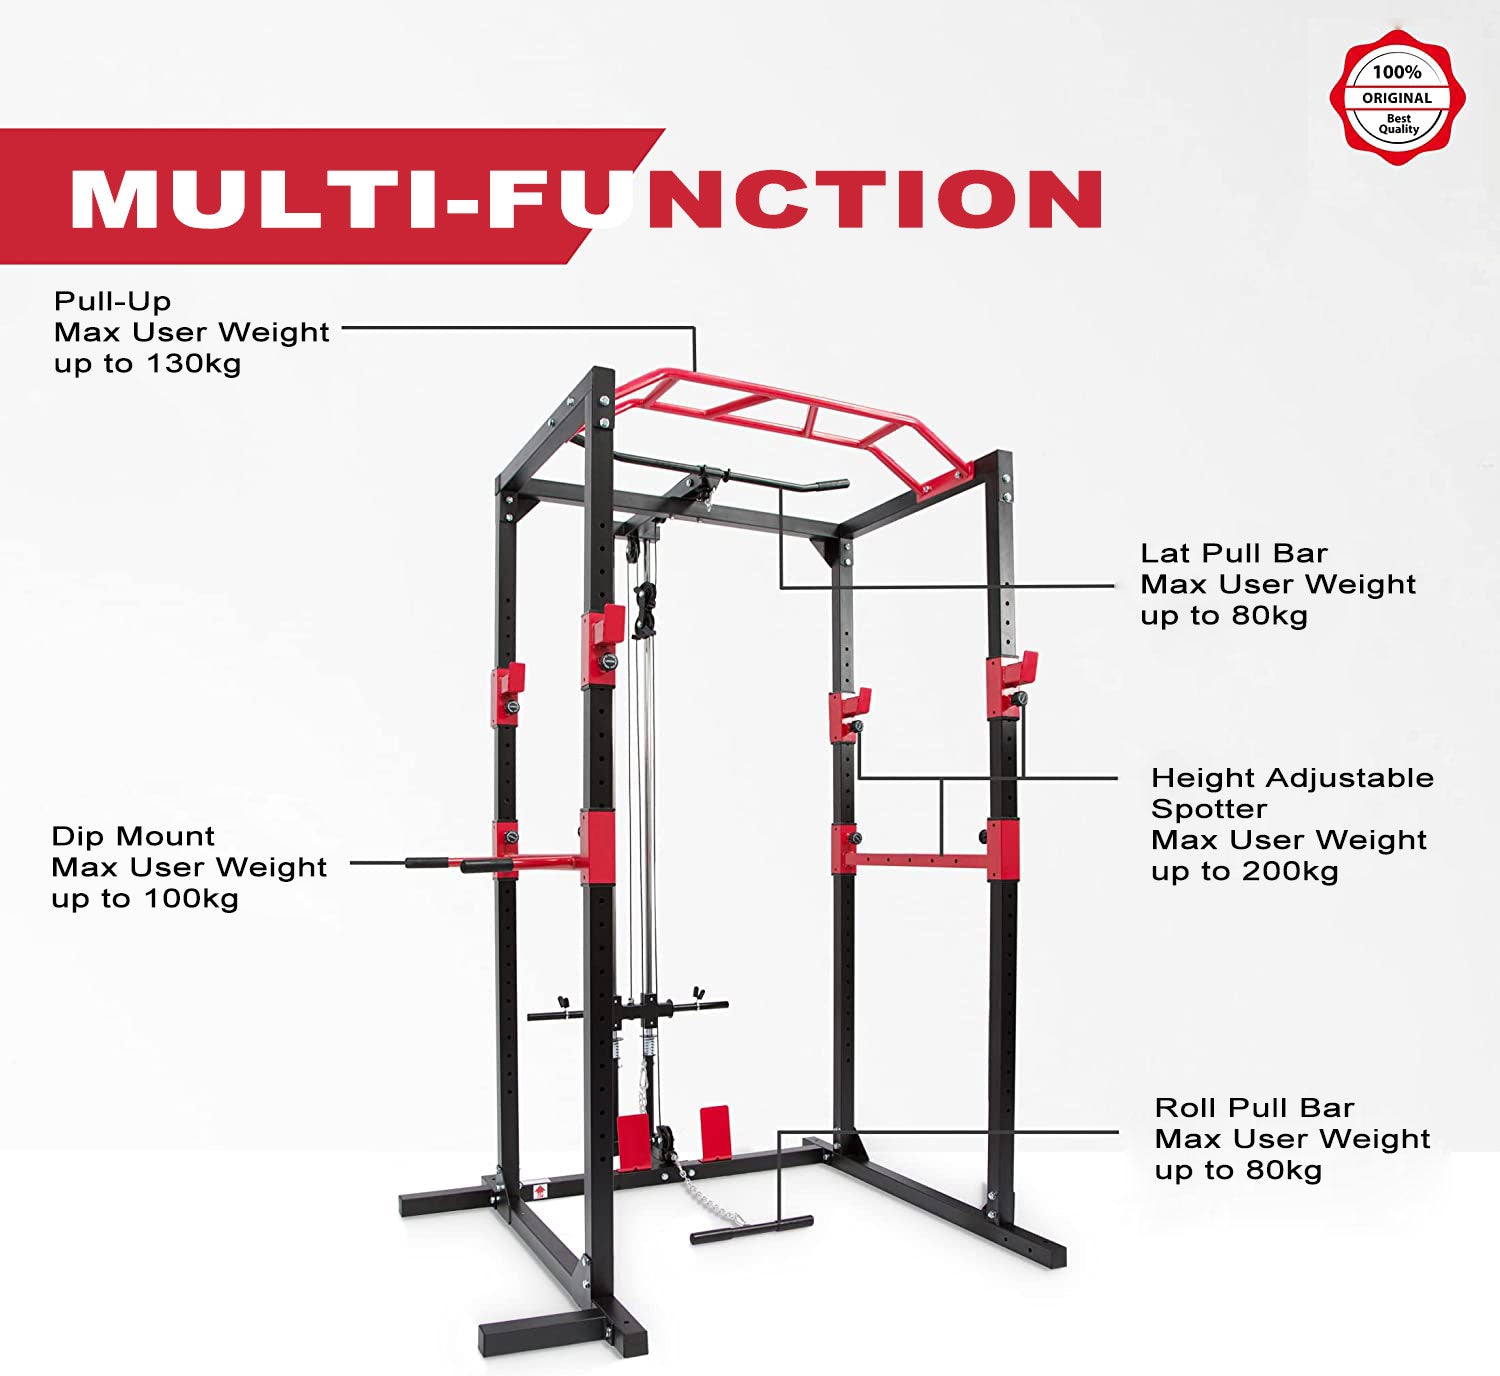 Multifunctional Power Fitness Rack for Effective Full Body Workout